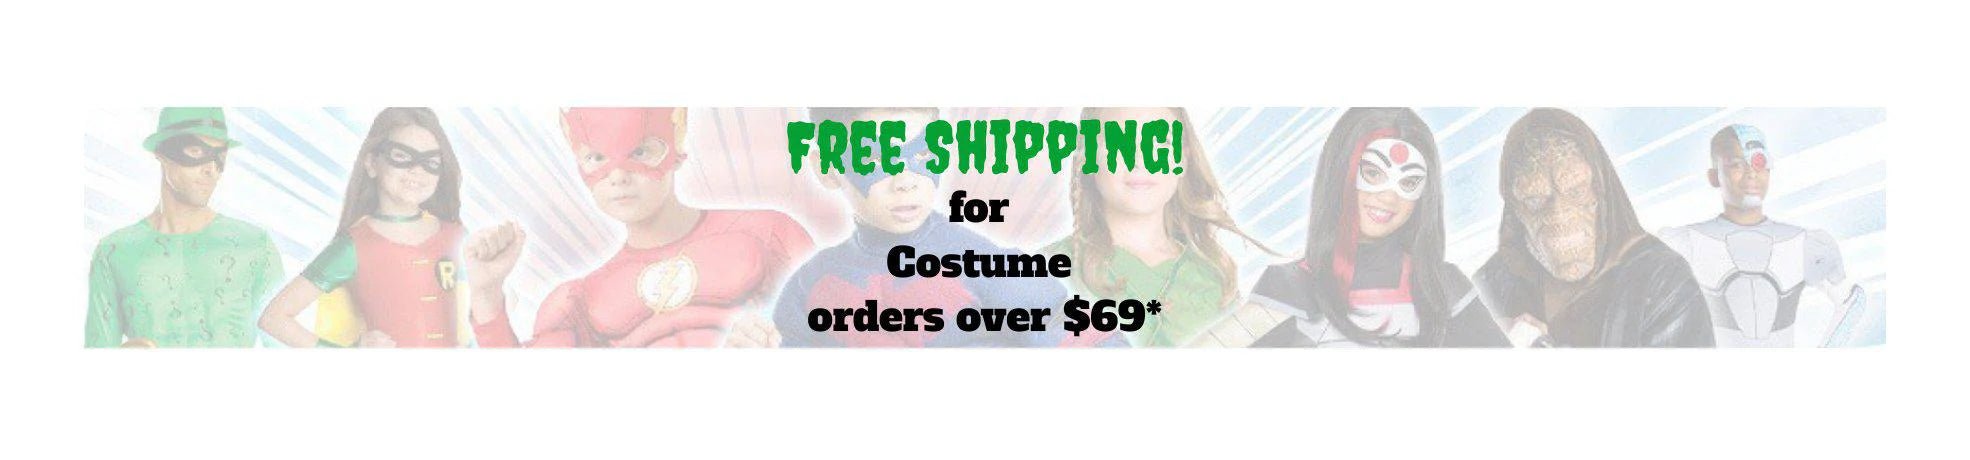 Family Fun with Adult & Kids Themed Costumes - Kids Mega Mart